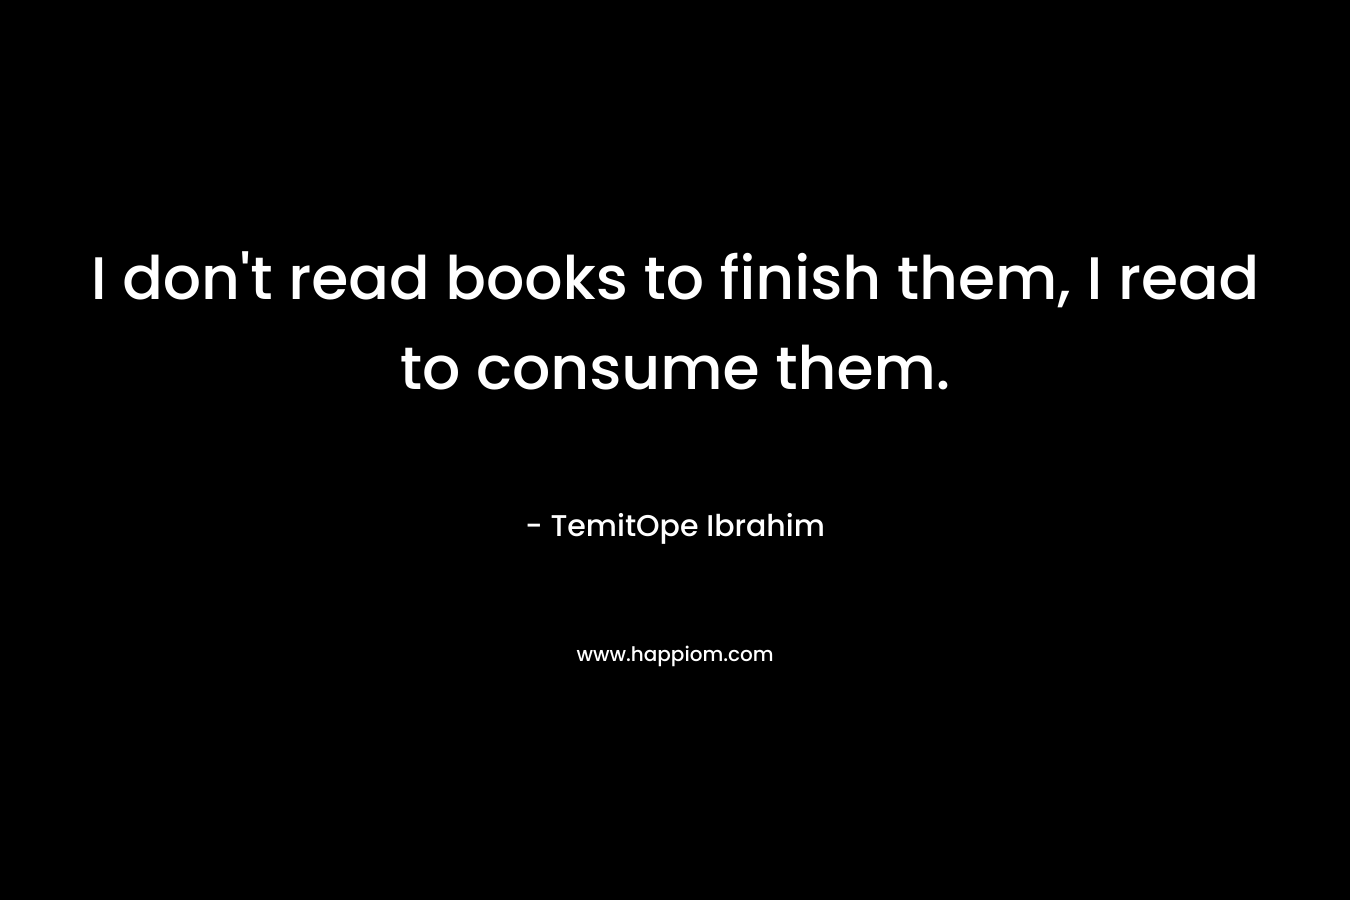 I don't read books to finish them, I read to consume them.